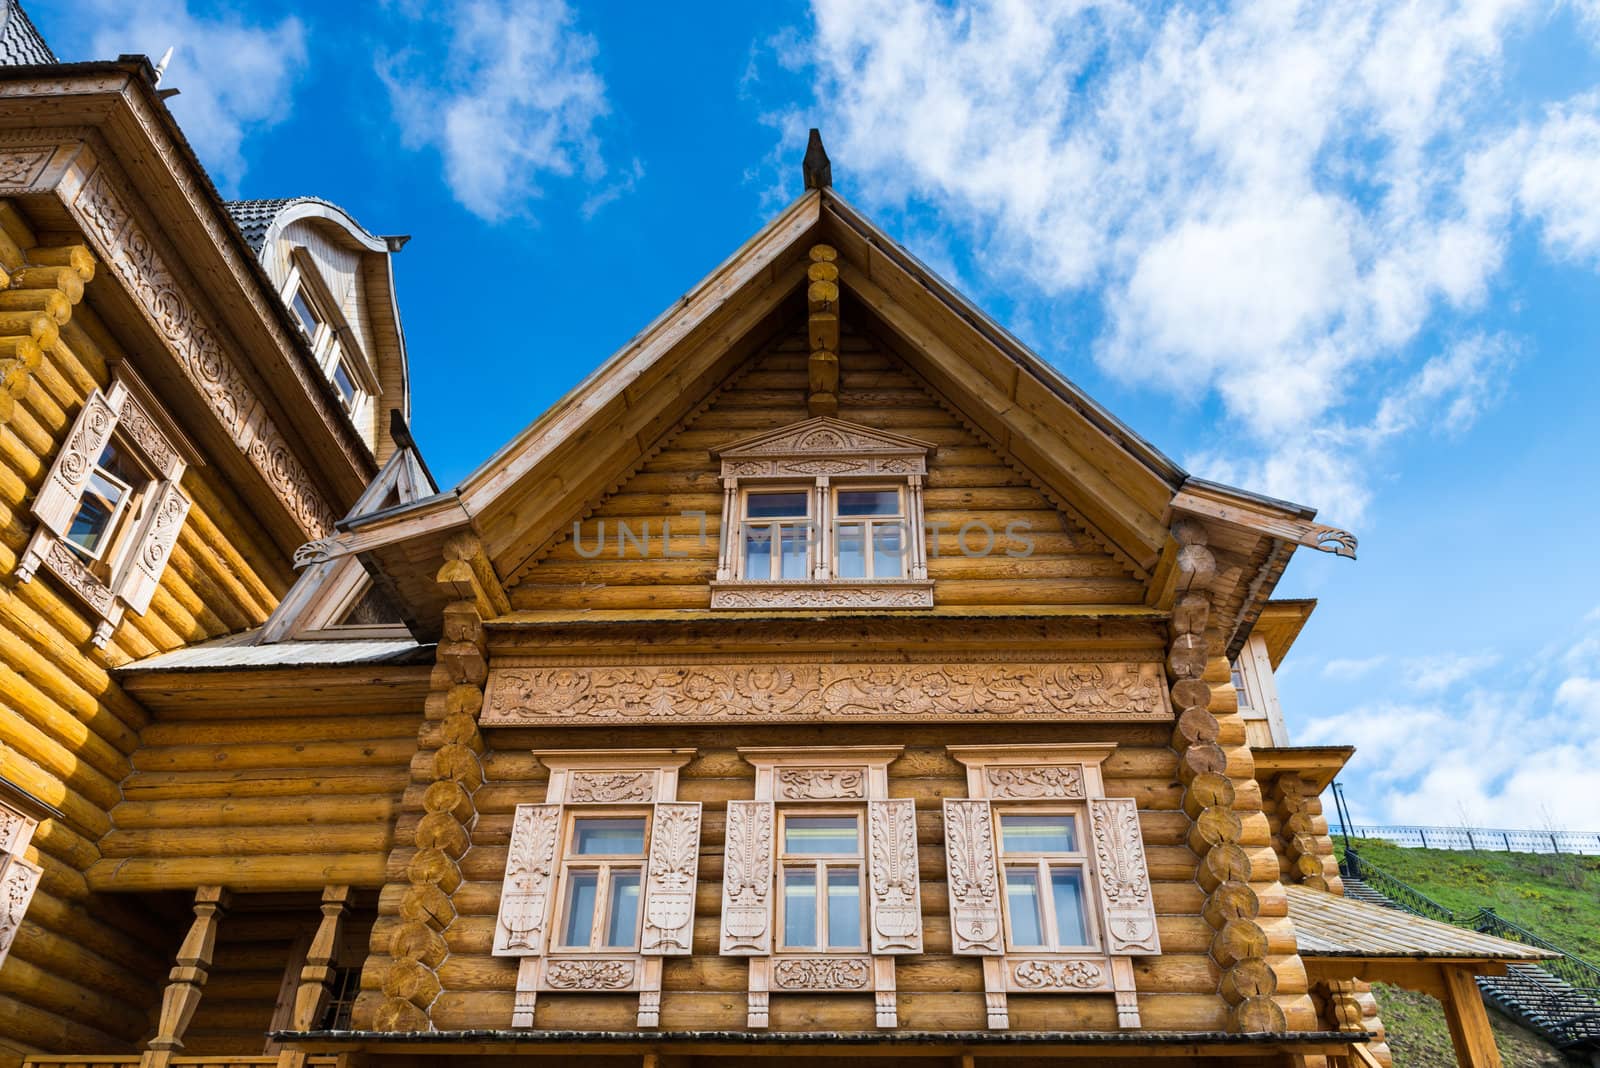 Wooden log house with decorated windows, Russian traditional architecture.